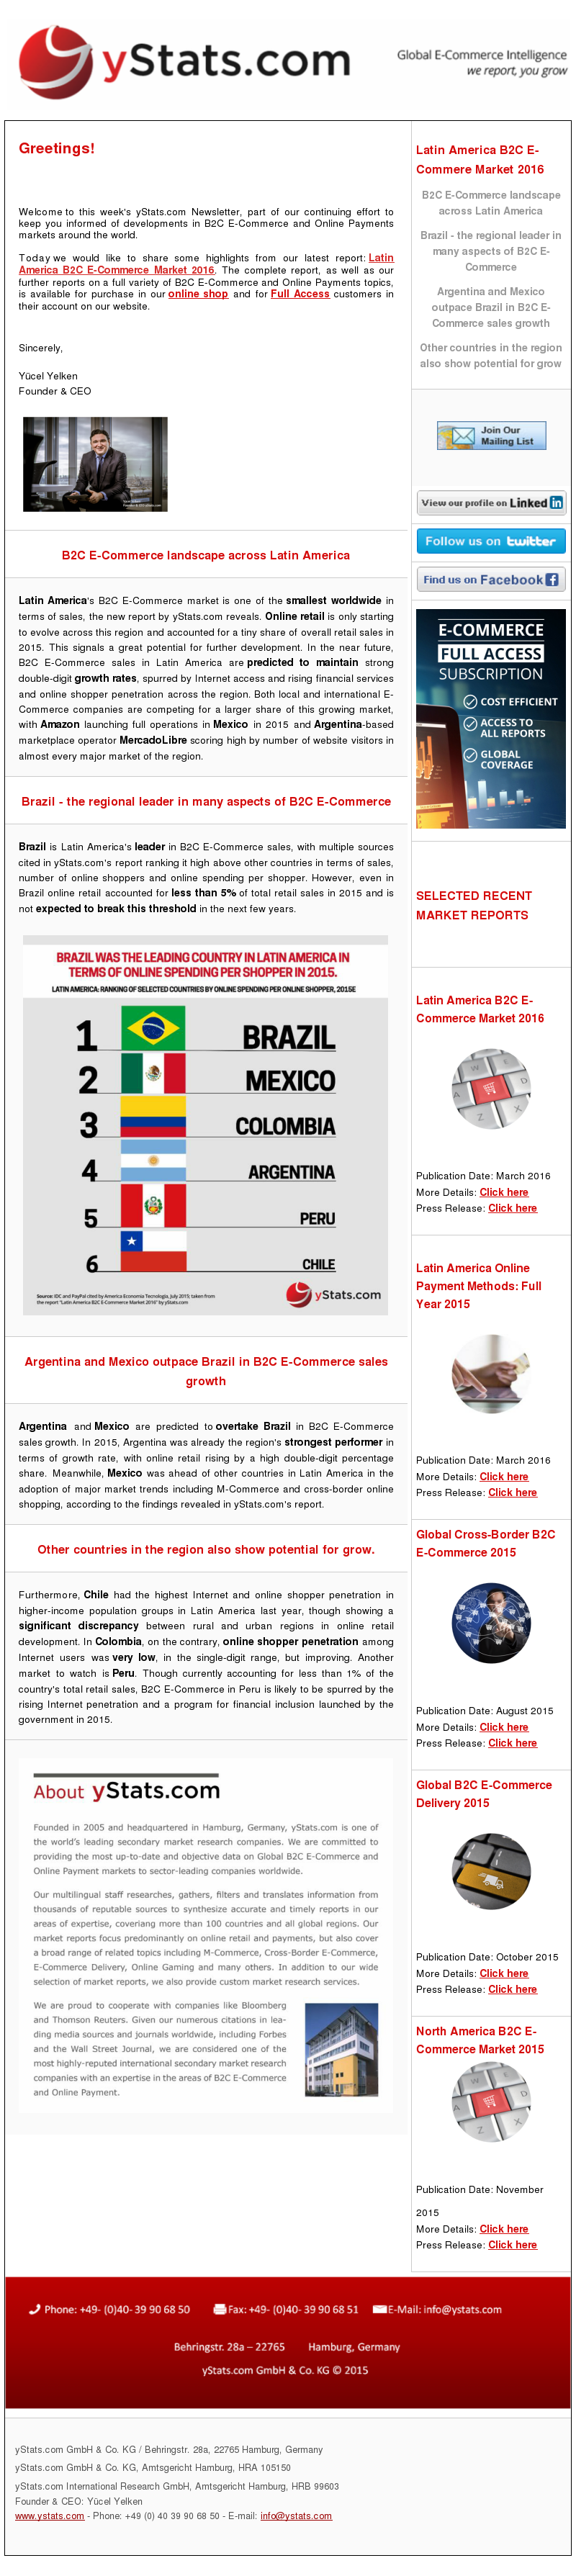 yStats.com Newsletter Latin America B2C E-Commerce Market 2016 , Brazil , emerging markets ,  ecommerce trends , online retail sales , ecommerce competitors , BRIC ecommerce major product category , online shopper penetration rate , retail sales share , mexico , argentina , Amazon , MercadoLibre , mobile shopping market , m-commerce , online shopper , market size , online shoppers , mobile shopping , ecommerce players , online retail , online shopping , online retail companies competition , local ecommerce players , international eCommerce players , newsletter , 2016 Latin America’s B2C E-Commerce market is one of the smallest worldwide in terms of sales, the new report by yStats.com reveals. Online retail is only starting to evolve across this region and accounted for a tiny share of overall retail sales in 2015. This signals a great potential for further development. In the near future, B2C E-Commerce sales in Latin America are predicted to maintain strong double-digit growth rates, spurred by Internet access, financial services and online shopper penetration rising across the region. Both local and international E-Commerce companies are competing for a larger share of this growing market, with Amazon launching full operations in Mexico in 2015 and Argentina-based marketplace operator MercadoLibre scoring high by number of website visitors in almost every major market of the region.

Brazil is Latin America’s leader in B2C E-Commerce sales, with multiple sources cited in yStats.com’s report ranking it high above other countries in terms of sales, number of online shoppers and online spending per shopper. However, even in Brazil online retail accounted for less than 5% of total retail sales in 2015 and is not expected to break this threshold in the next few years.

Argentina and Mexico are predicted to overtake Brazil in B2C E-Commerce sales growth. In 2015, Argentina was already the region’s strongest performer in terms of growth rate, with online retail rising by a high double-digit percentage share. Meanwhile, Mexico was ahead of other countries in Latin America in the adoption of major market trends including M-Commerce and cross-border online shopping, according to the findings revealed in yStats.com’s report.

Furthermore, Chile had the highest Internet and online shopper penetration in higher-income population groups in Latin America last year, though showing a significant discrepancy between rural and urban regions in online retail development. In Colombia, on the contrary, online shopper penetration among Internet users was very low, in the single-digit range, but improving. Another market to watch is Peru. Though currently accounting for less than 1% of the country’s total retail sales, B2C E-Commerce in Peru is likely to be spurred by the rising Internet penetration and a program for financial inclusion launched by the government in 2015.